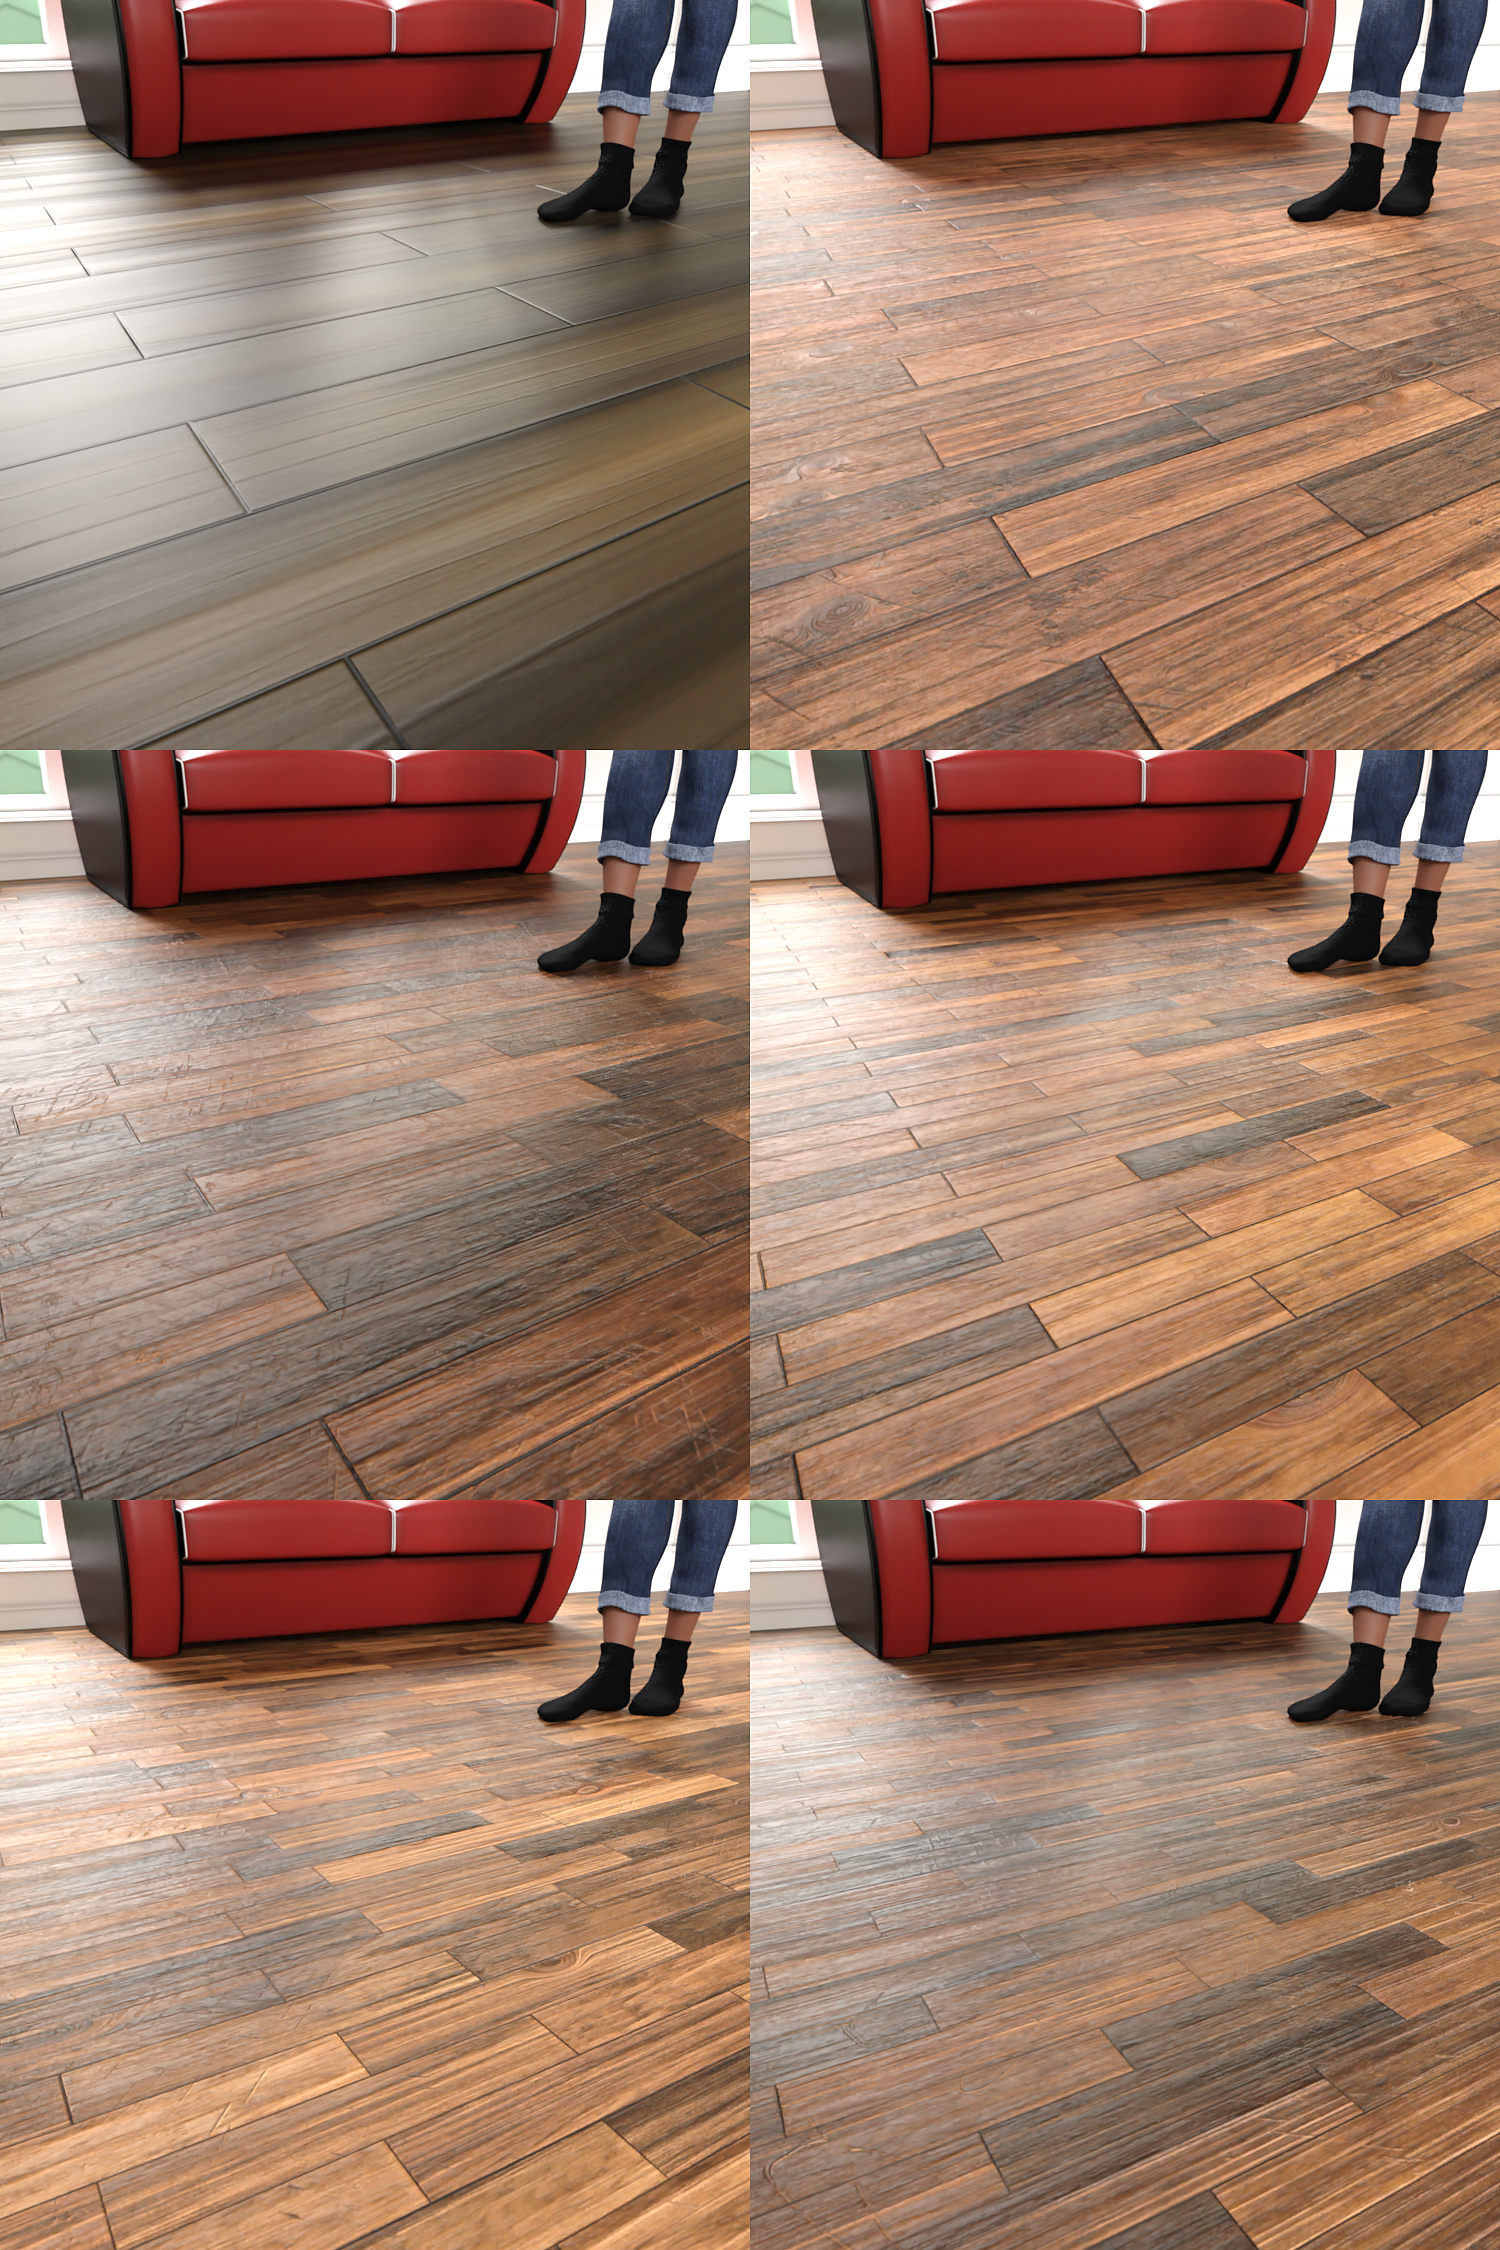 Laminated Wood Floors Iray Shaders by: JGreenlees, 3D Models by Daz 3D